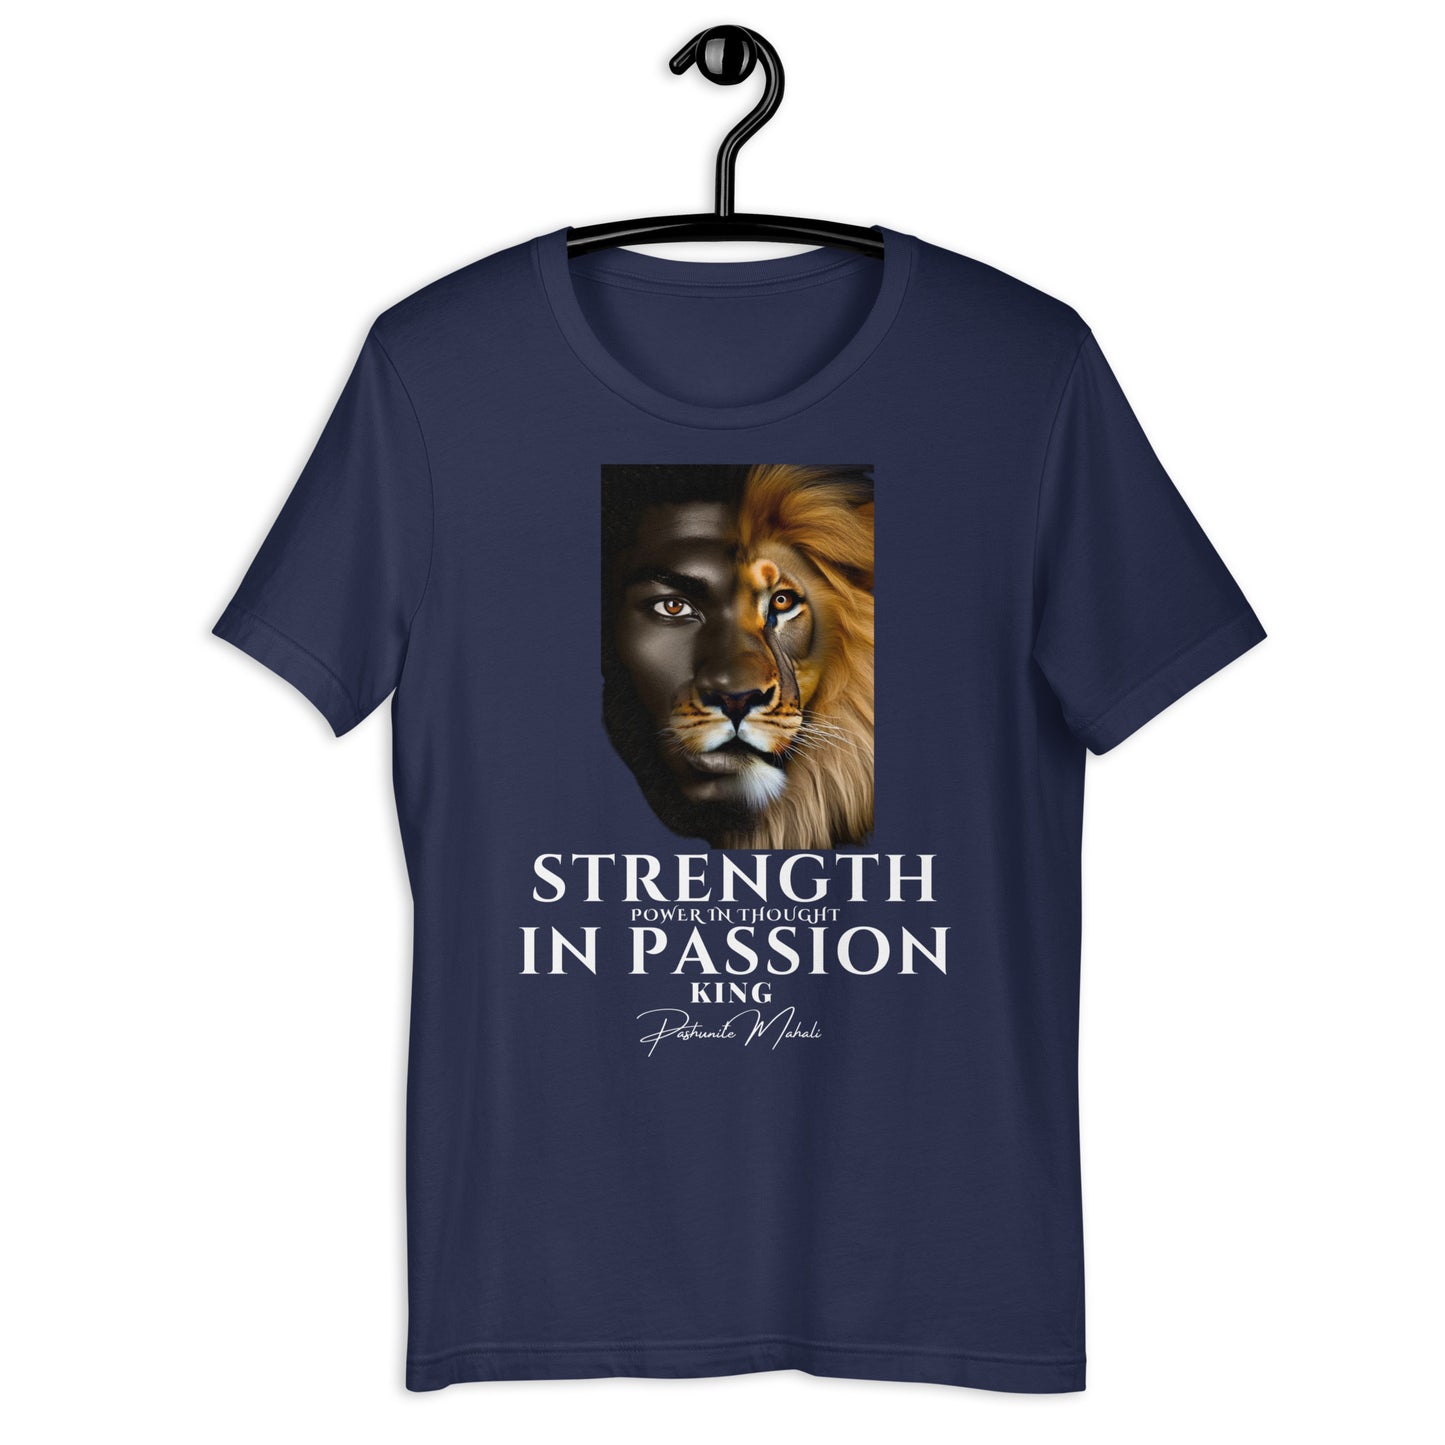 Strength In Passion Power In Thought King Tee